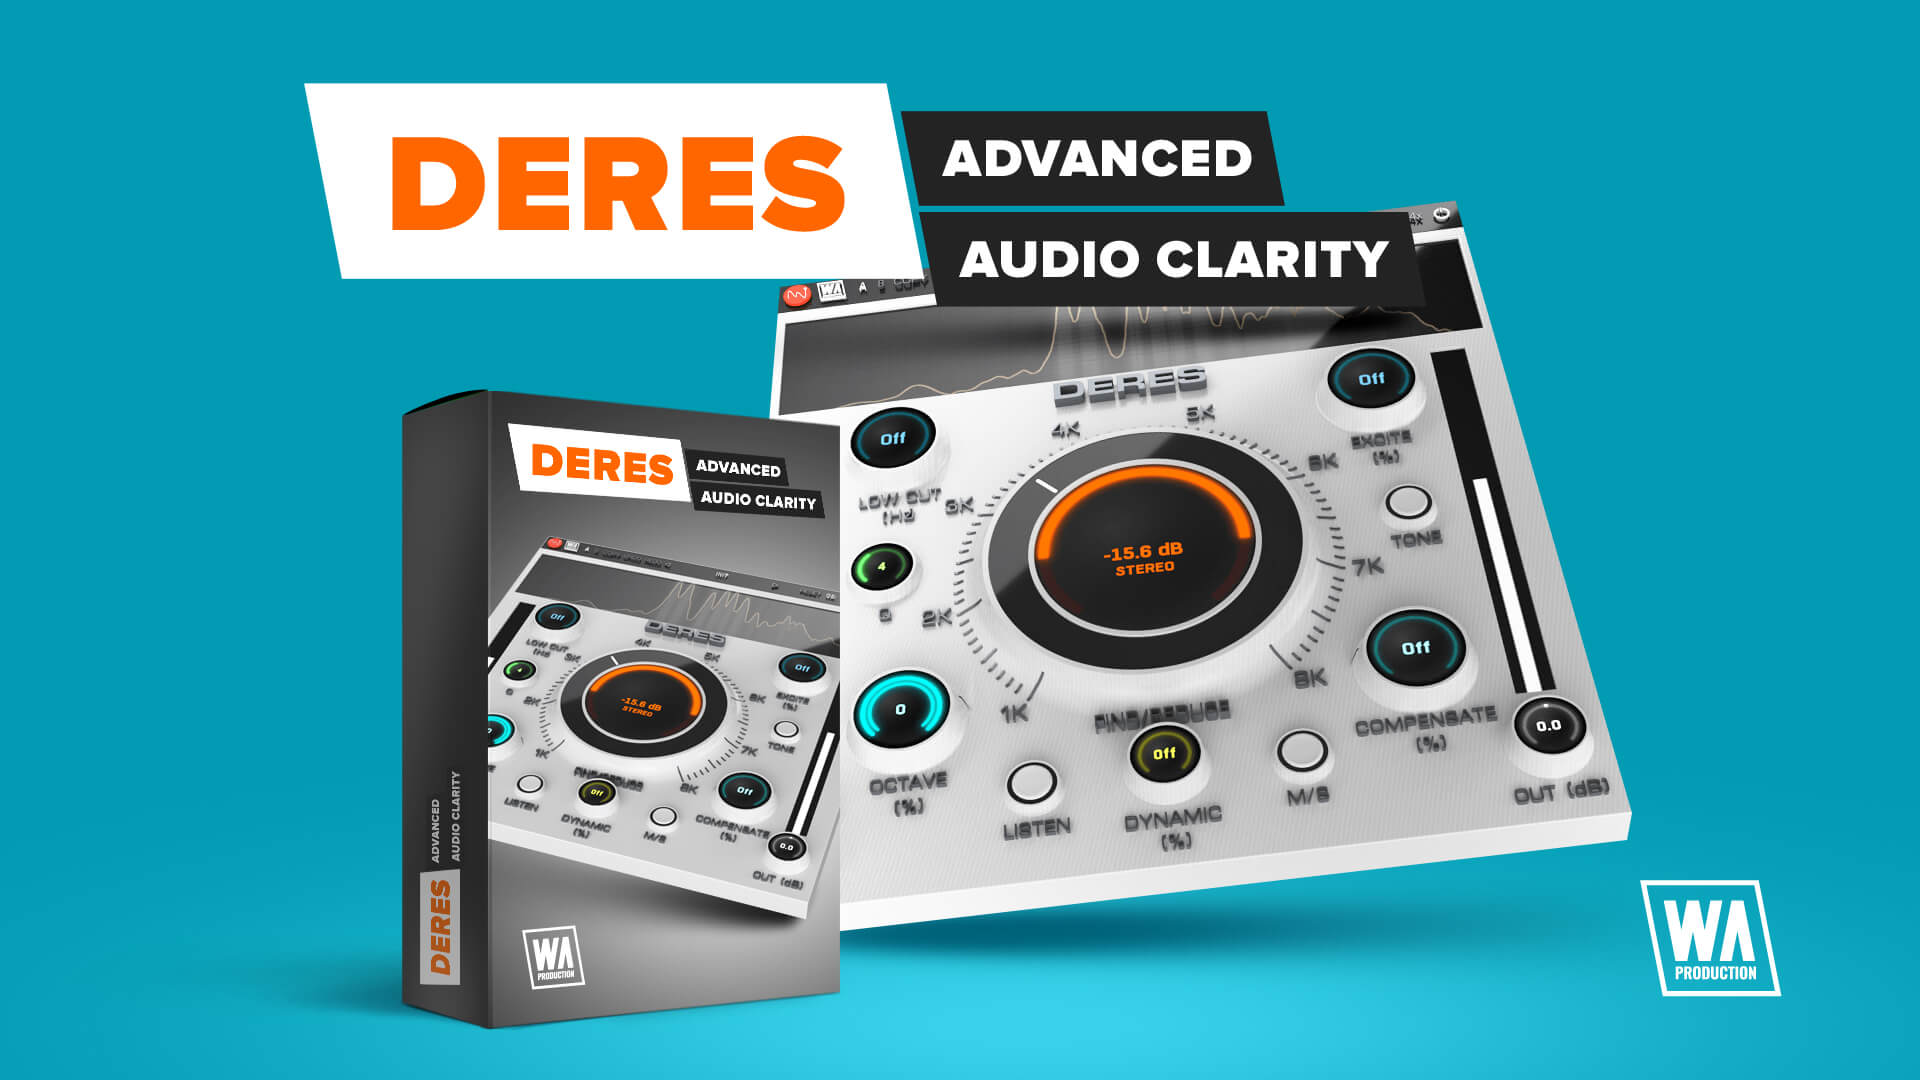 W. A. Production releases "Deres" FX Plugin